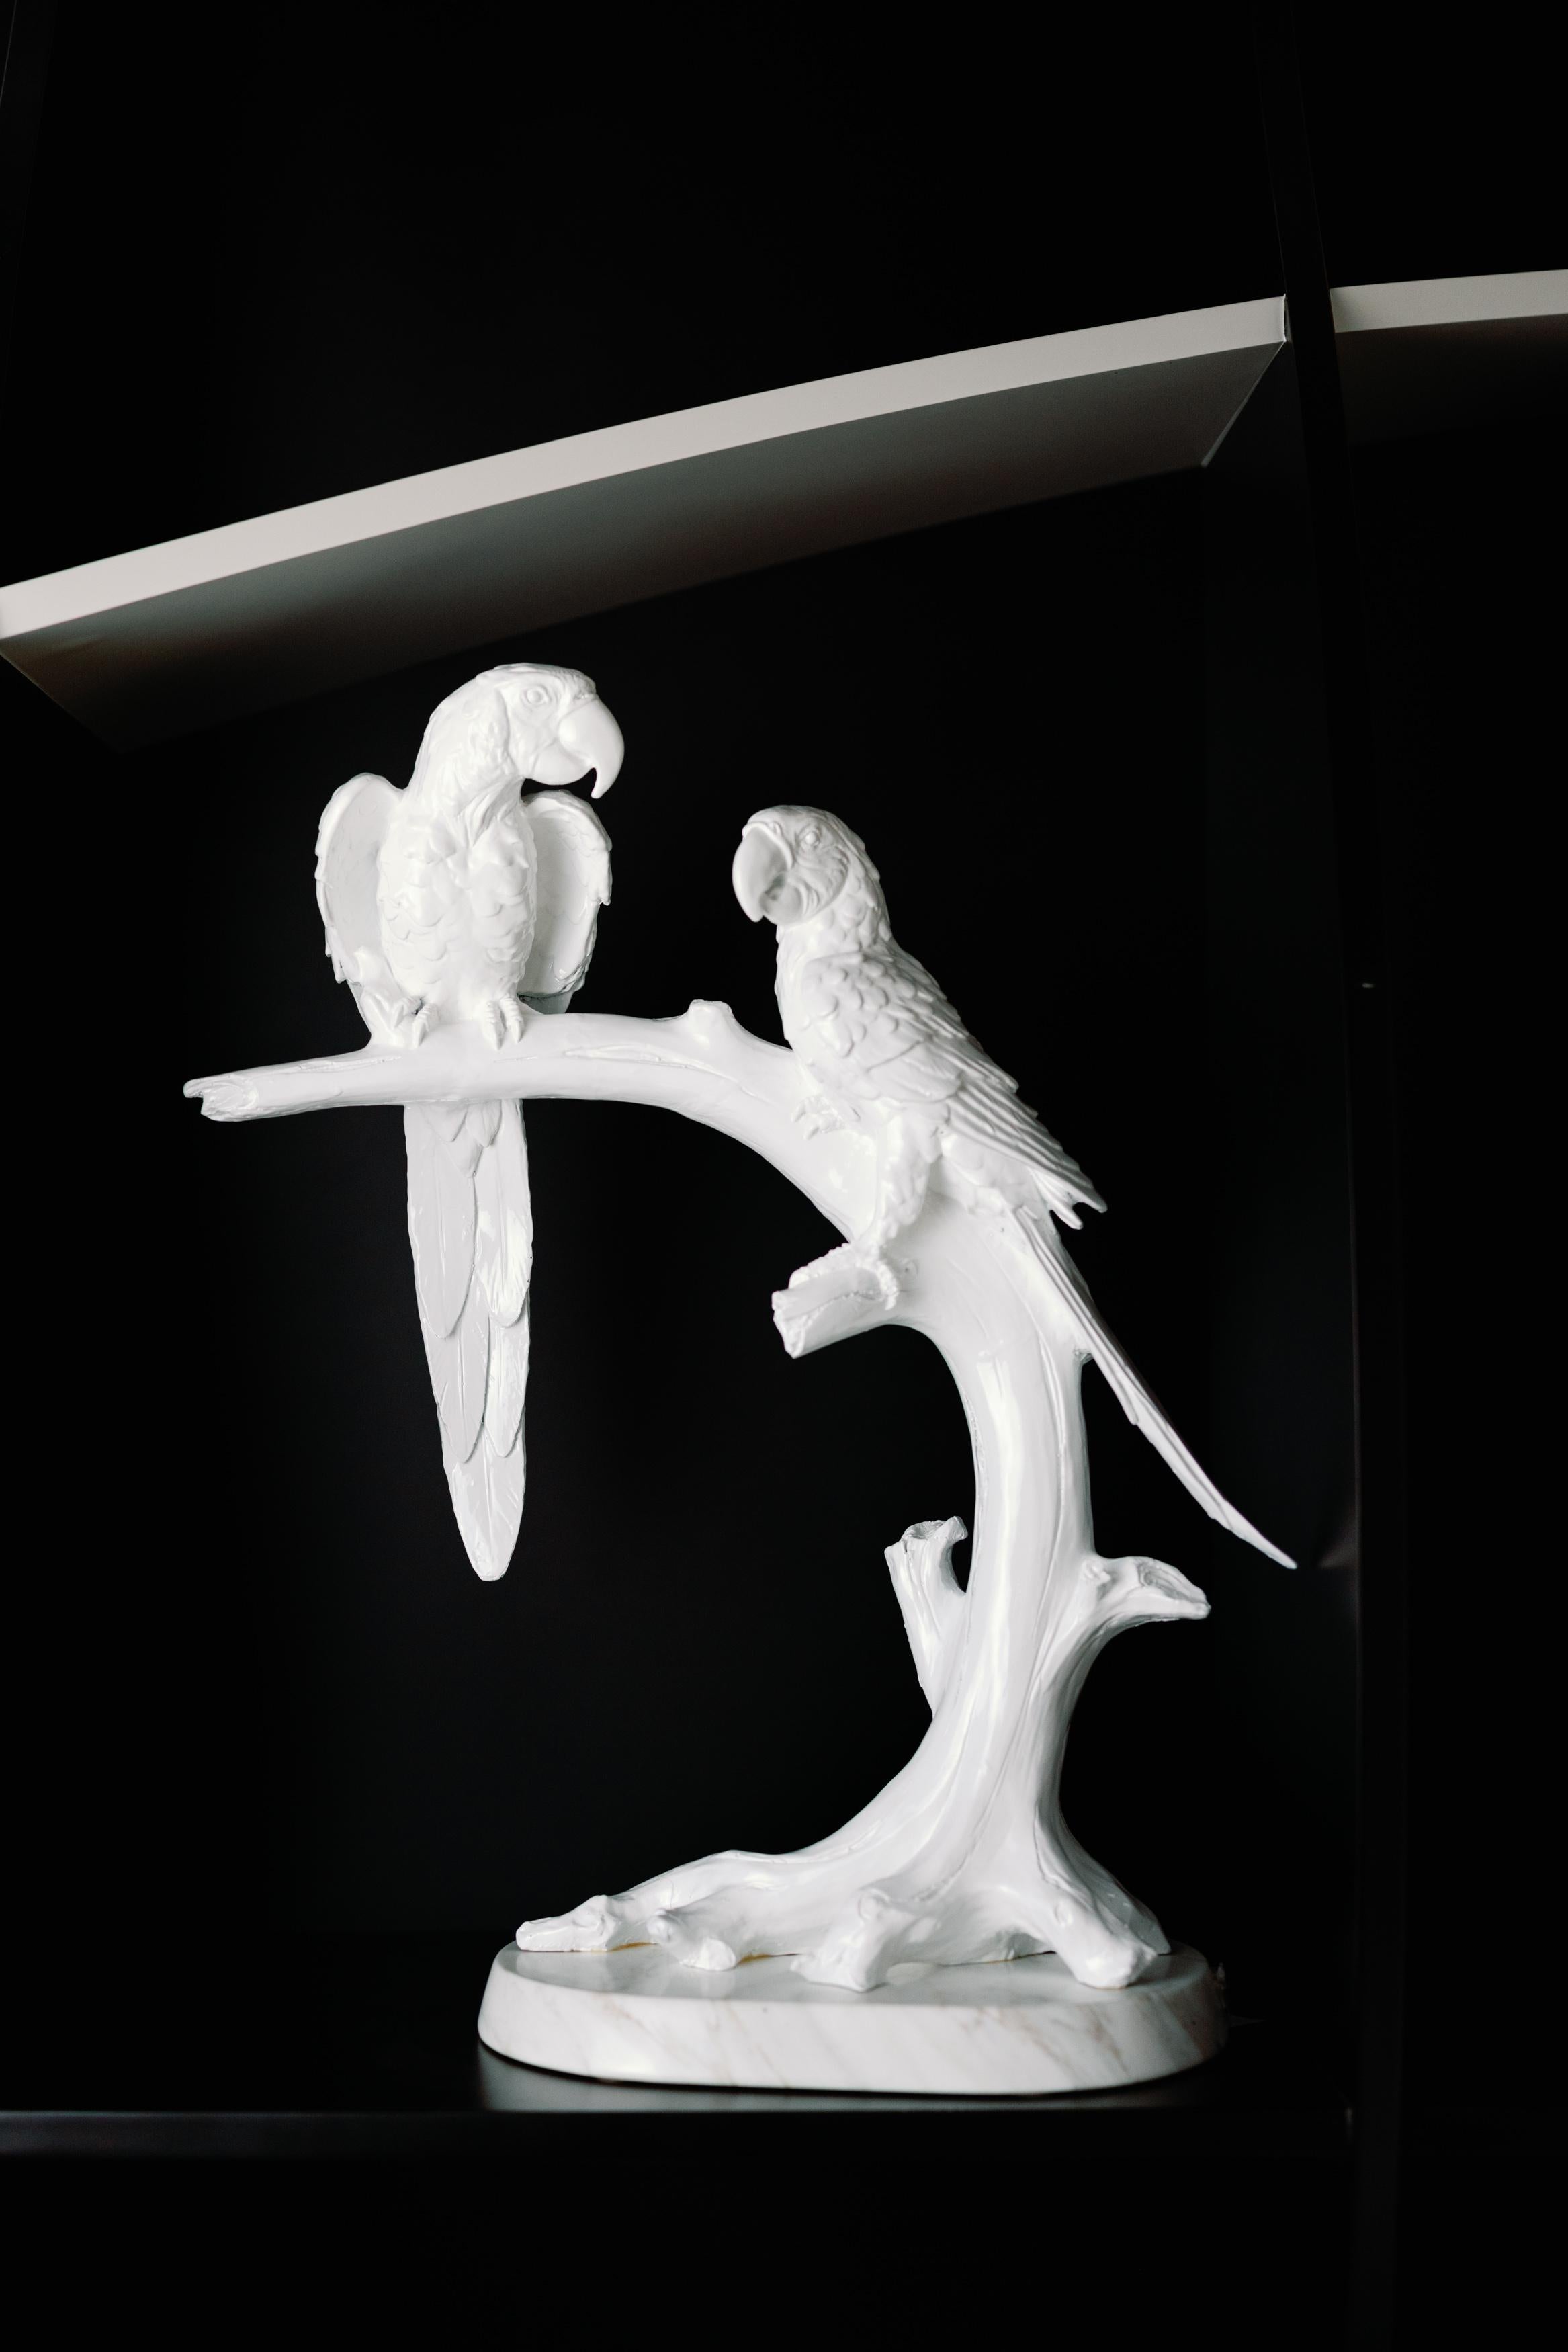 Parrots on Branch Statue with Calacatta Bianco base, Lusitanus Home Collection, by Lusitanus Home.

Decorative parrots on branch white lacquered resin statue, with base in Calacatta Bianco marble. Designed to be a unique sculpture piece standing in